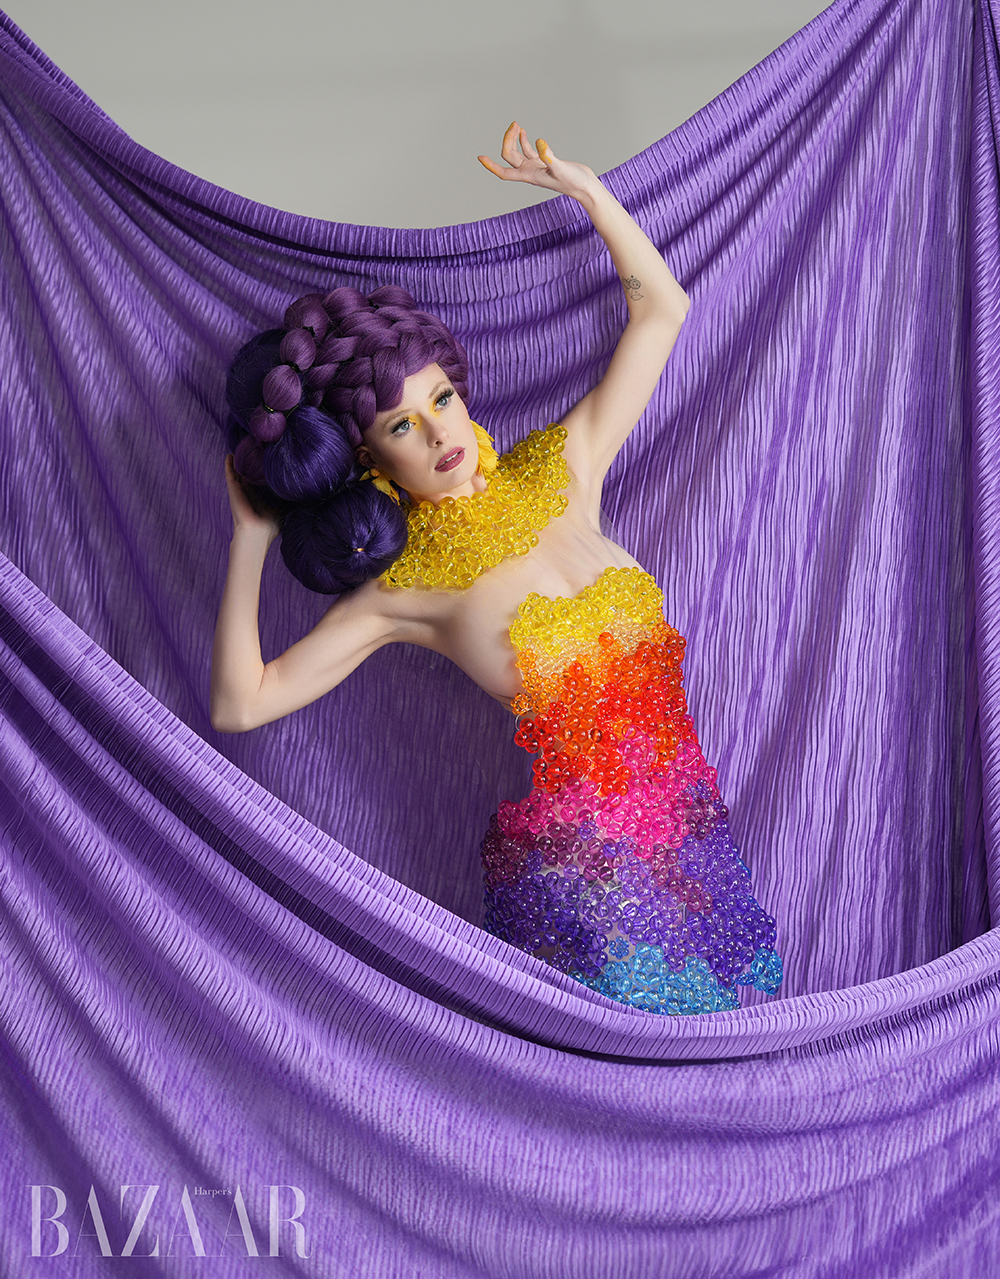 Game of colors - A photoshoot by photographer Jennifer Woo 1